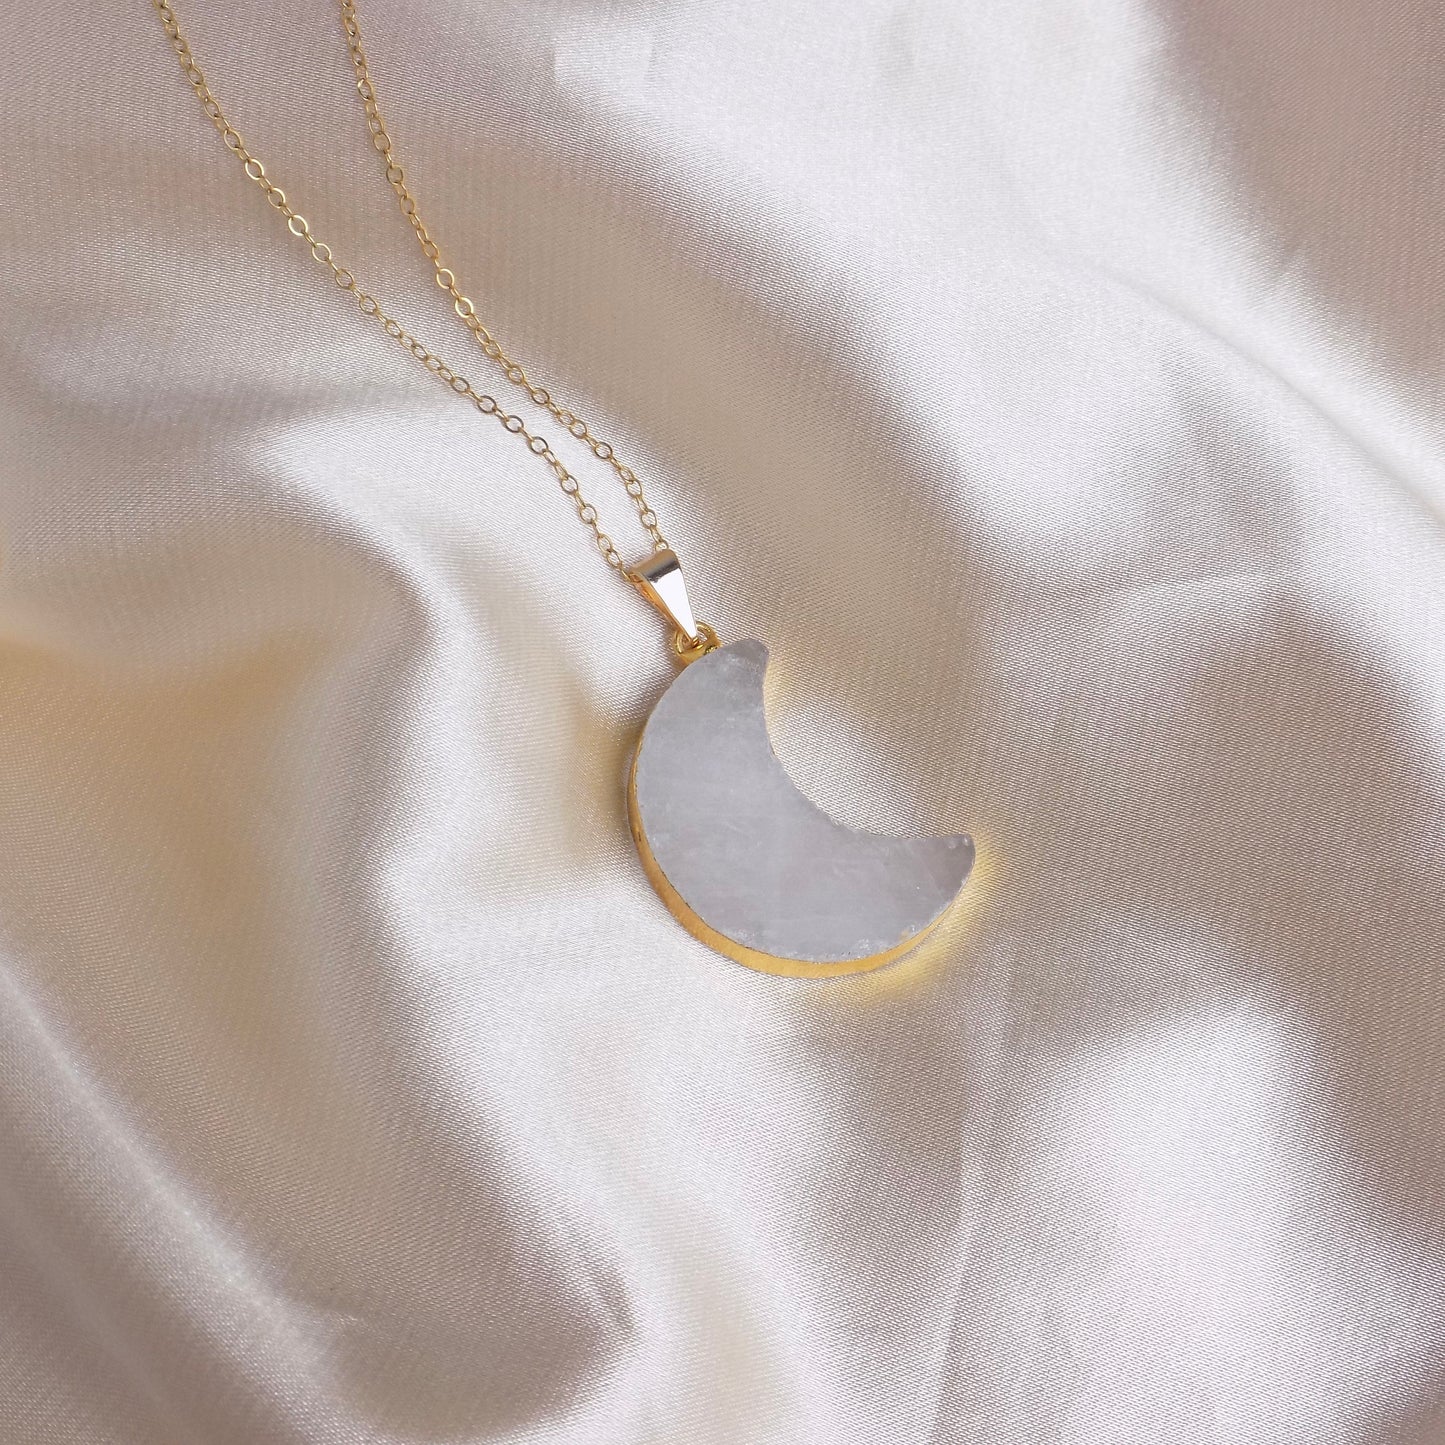 Crescent Moon Crystal Necklace Gold, White Quartz Pendant, Large Moon Charm, Boho Christmas Gifts For Her, R14-14